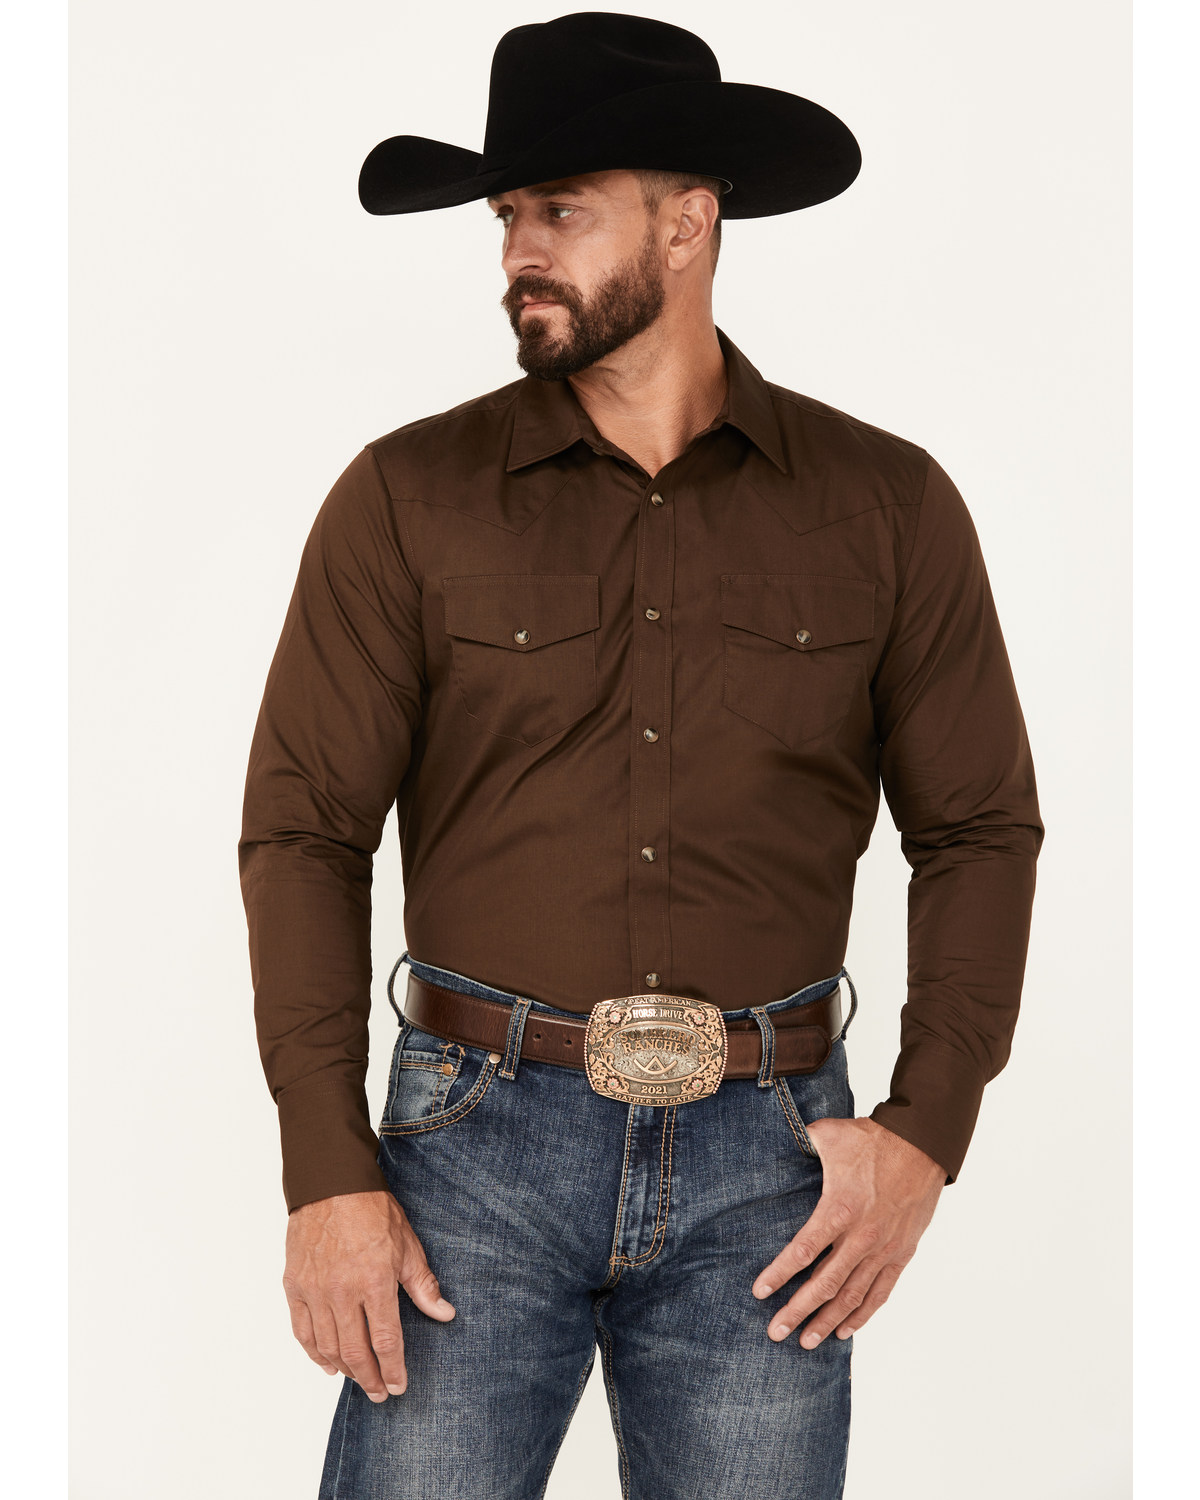 Gibson Trading Co Men's Basic Solid Twill Long Sleeve Snap Western Shirt